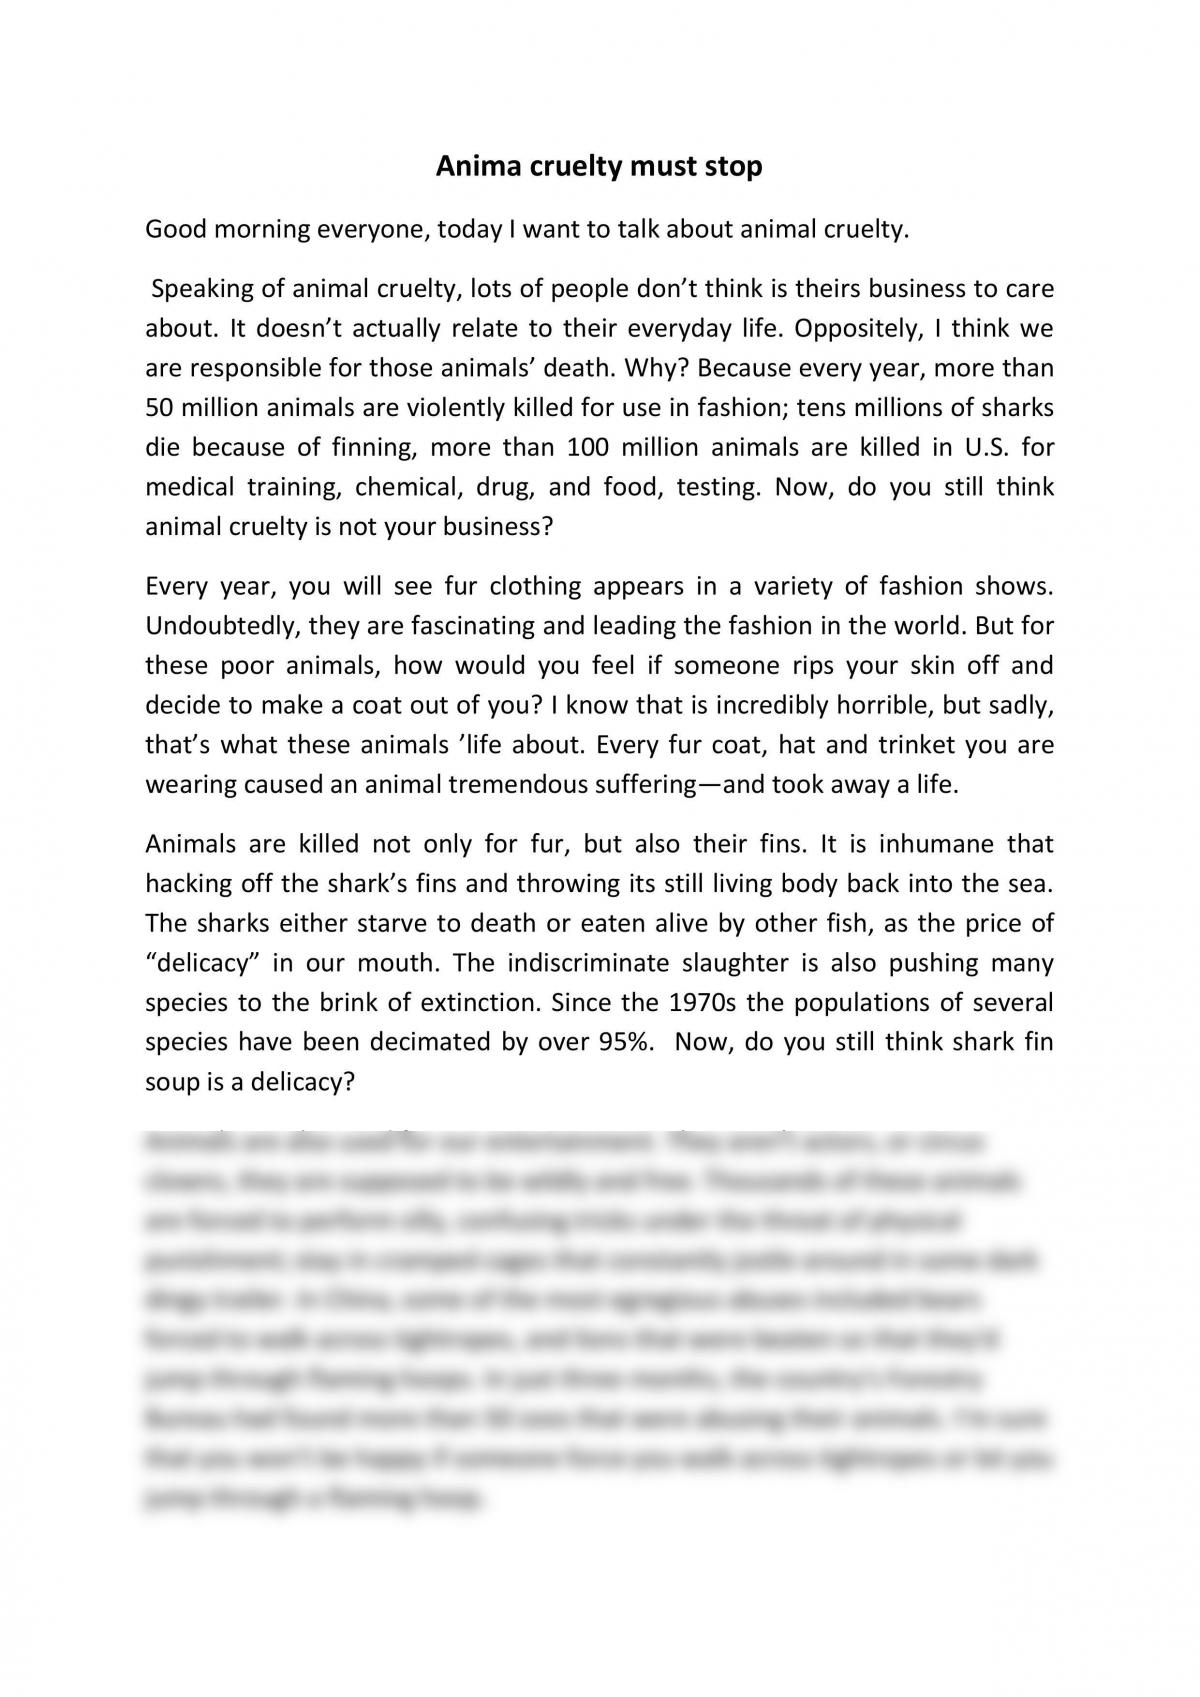 essay about killing animals